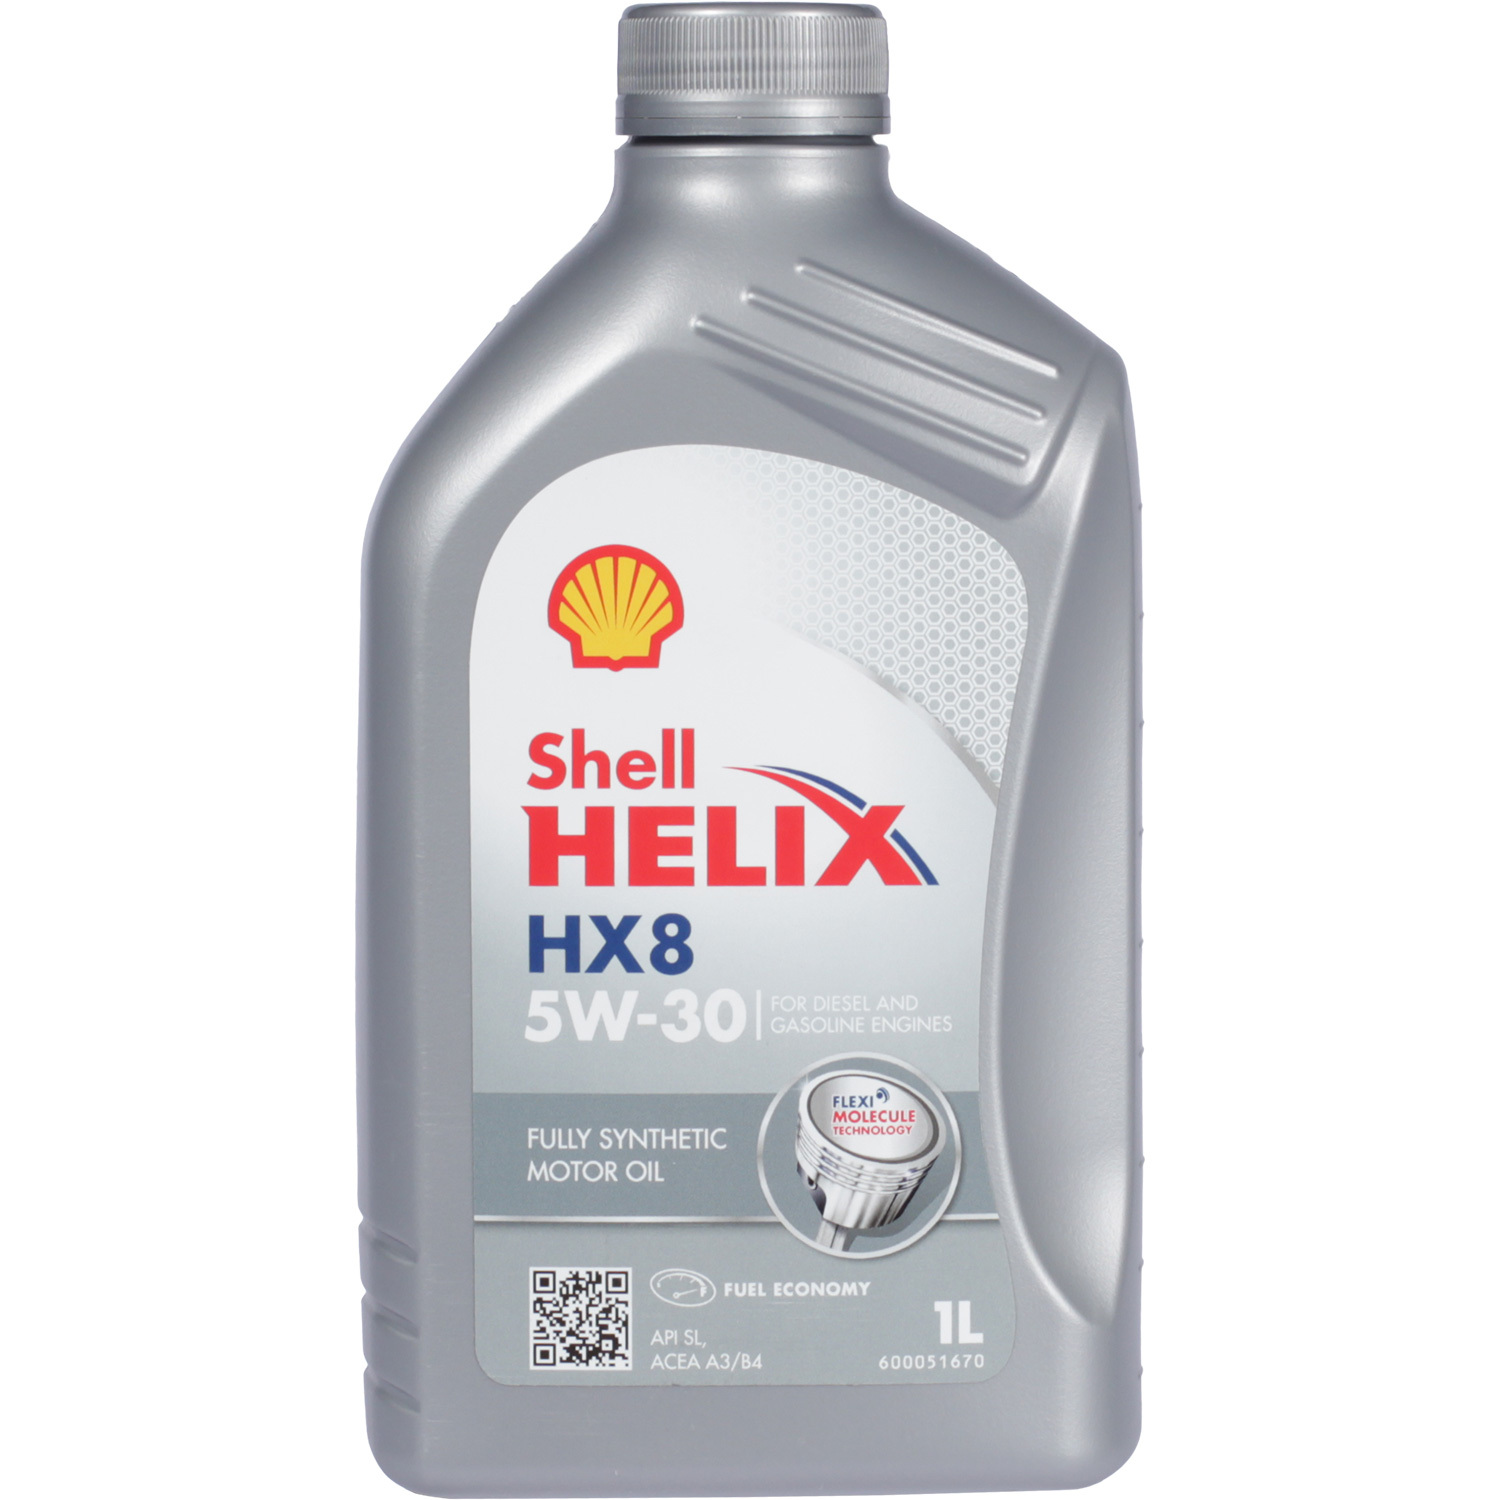 Shell Моторное масло Shell Helix HX8 5W-30, 1 л масло моторное shell hx8 5w40 1л